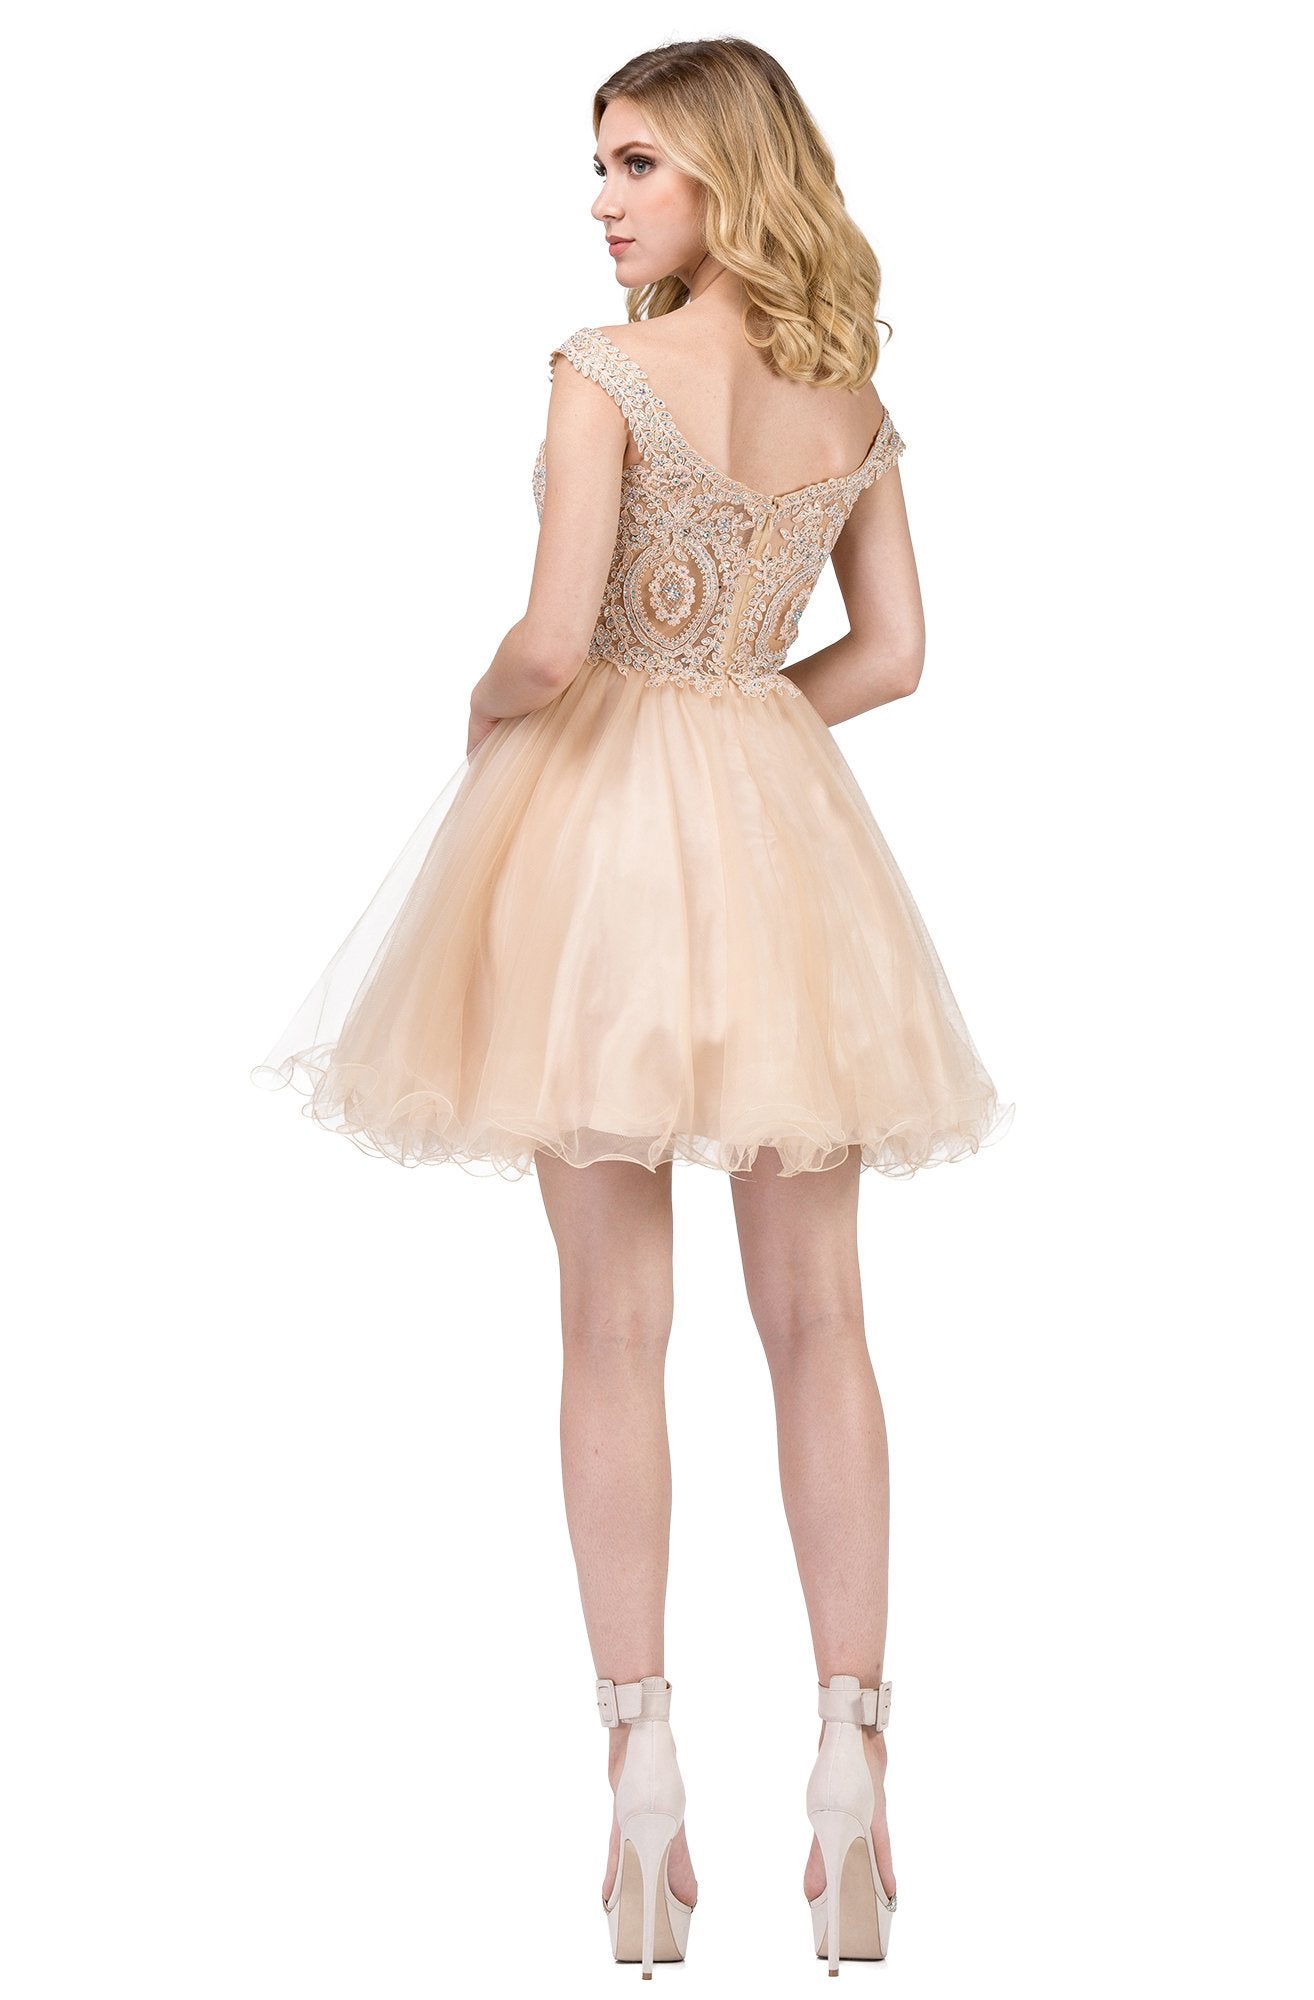 Dancing Queen - 3070 Beaded Lace Fit And Flare Cocktail Dress In Neutral and Yellow